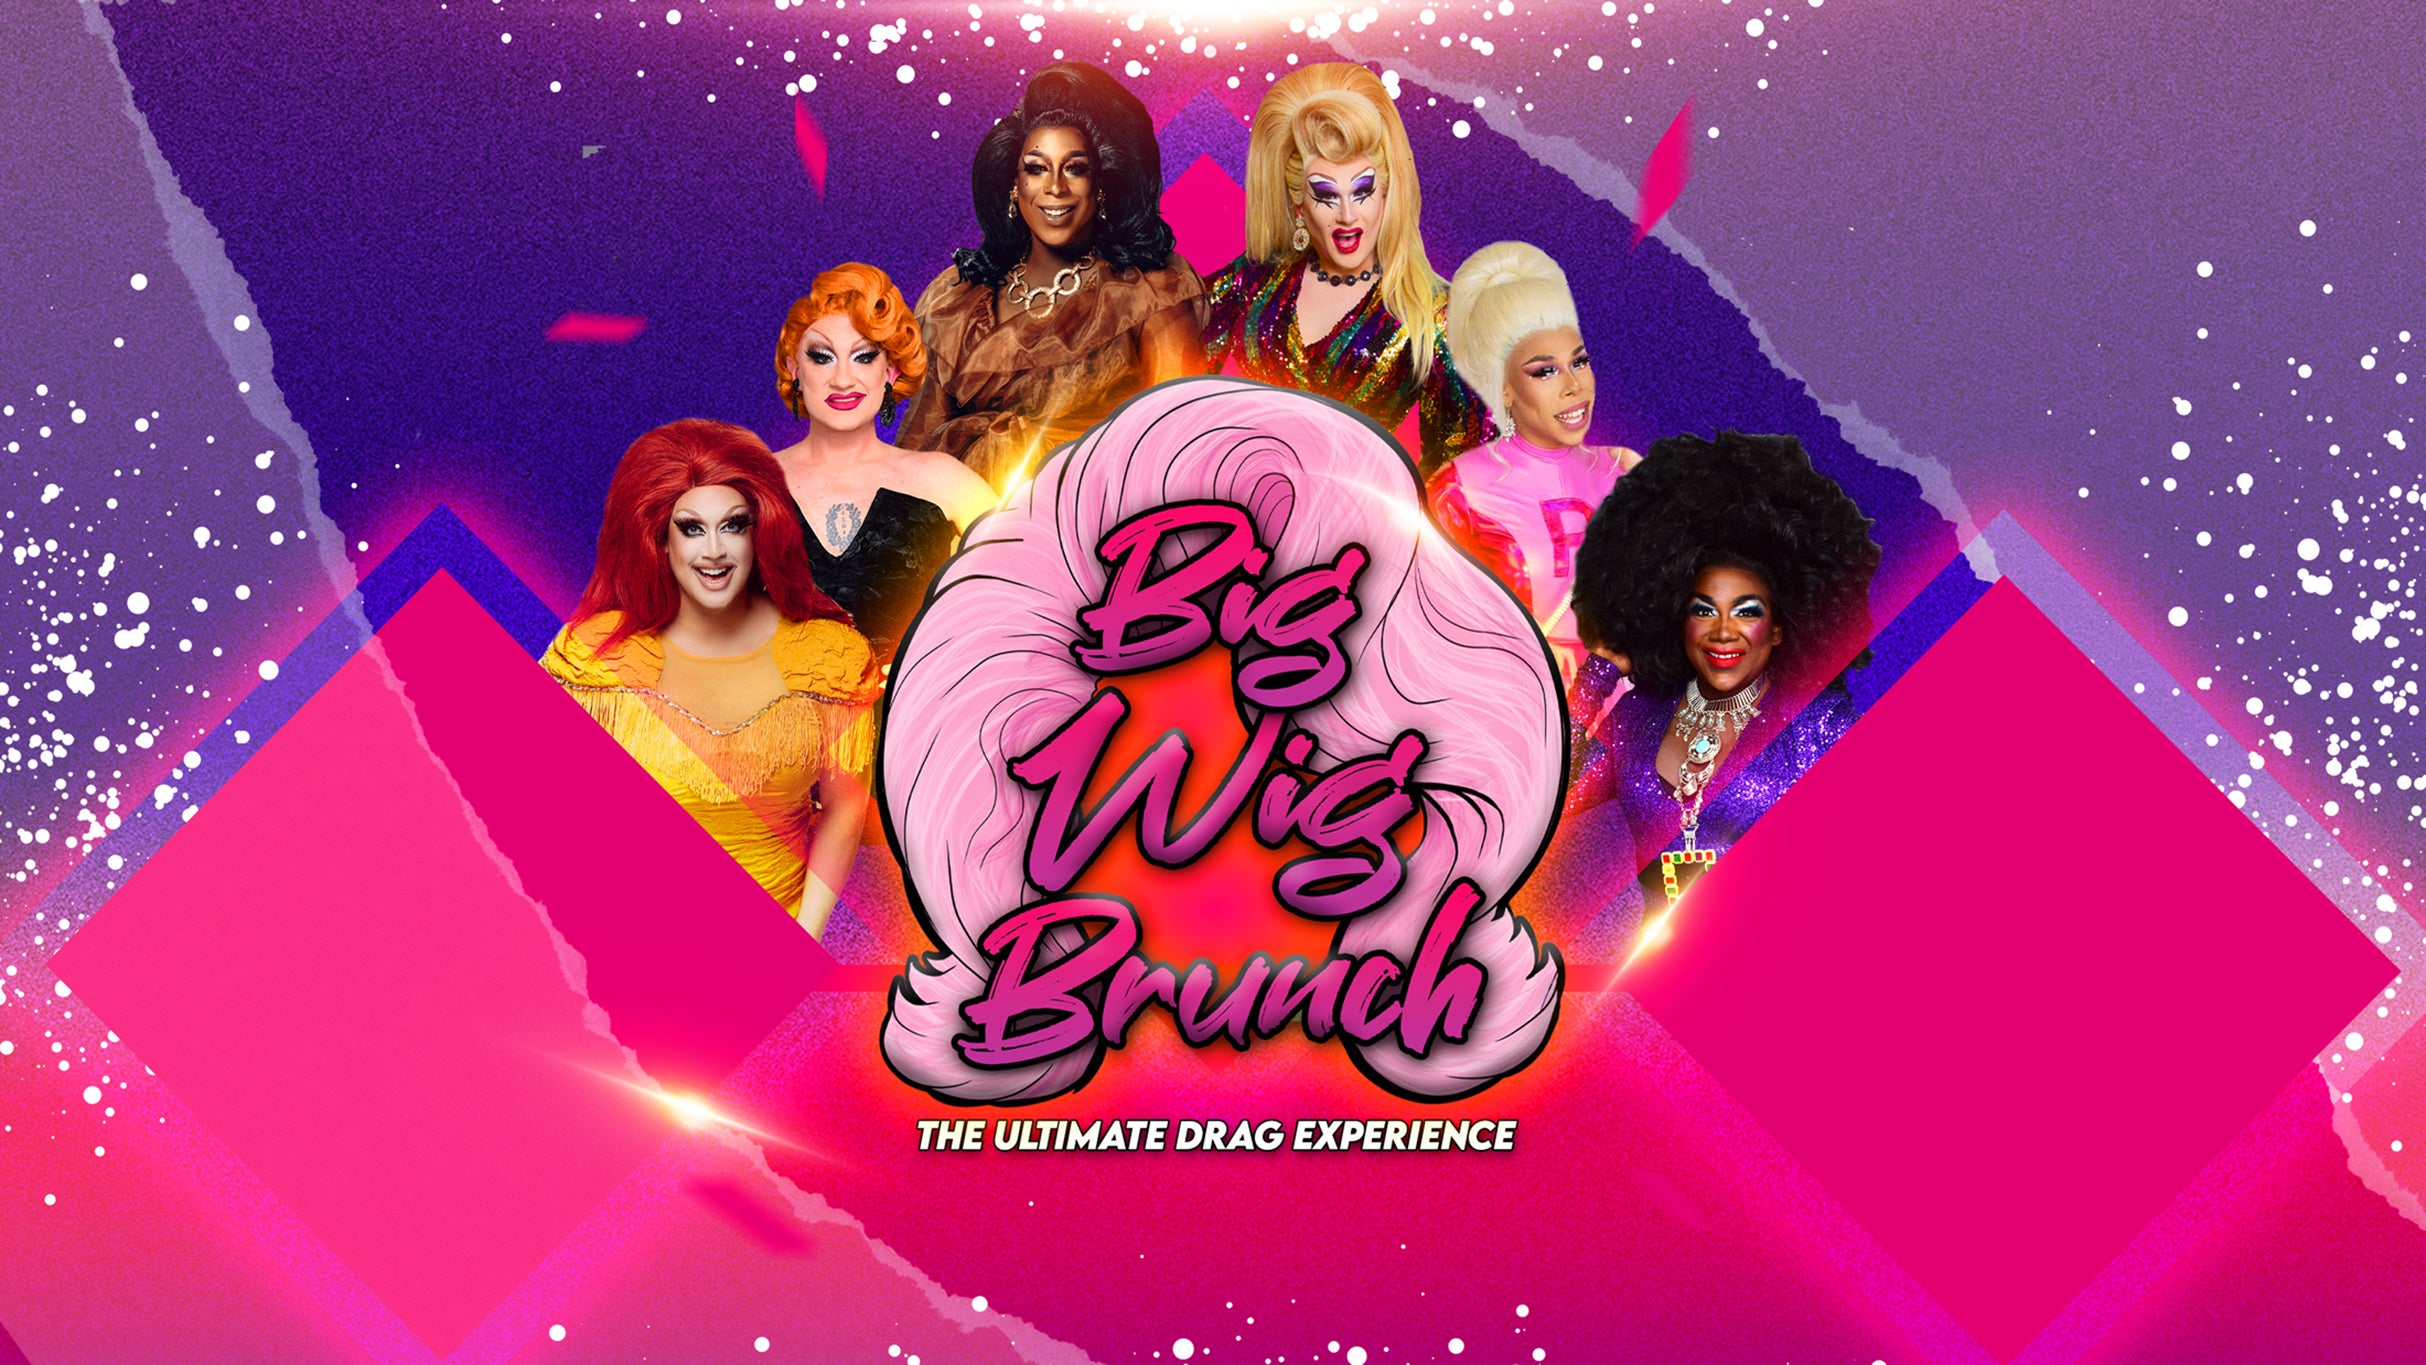 Big Wig Ariana Grande Brunch: The Ultimate Drag Experience